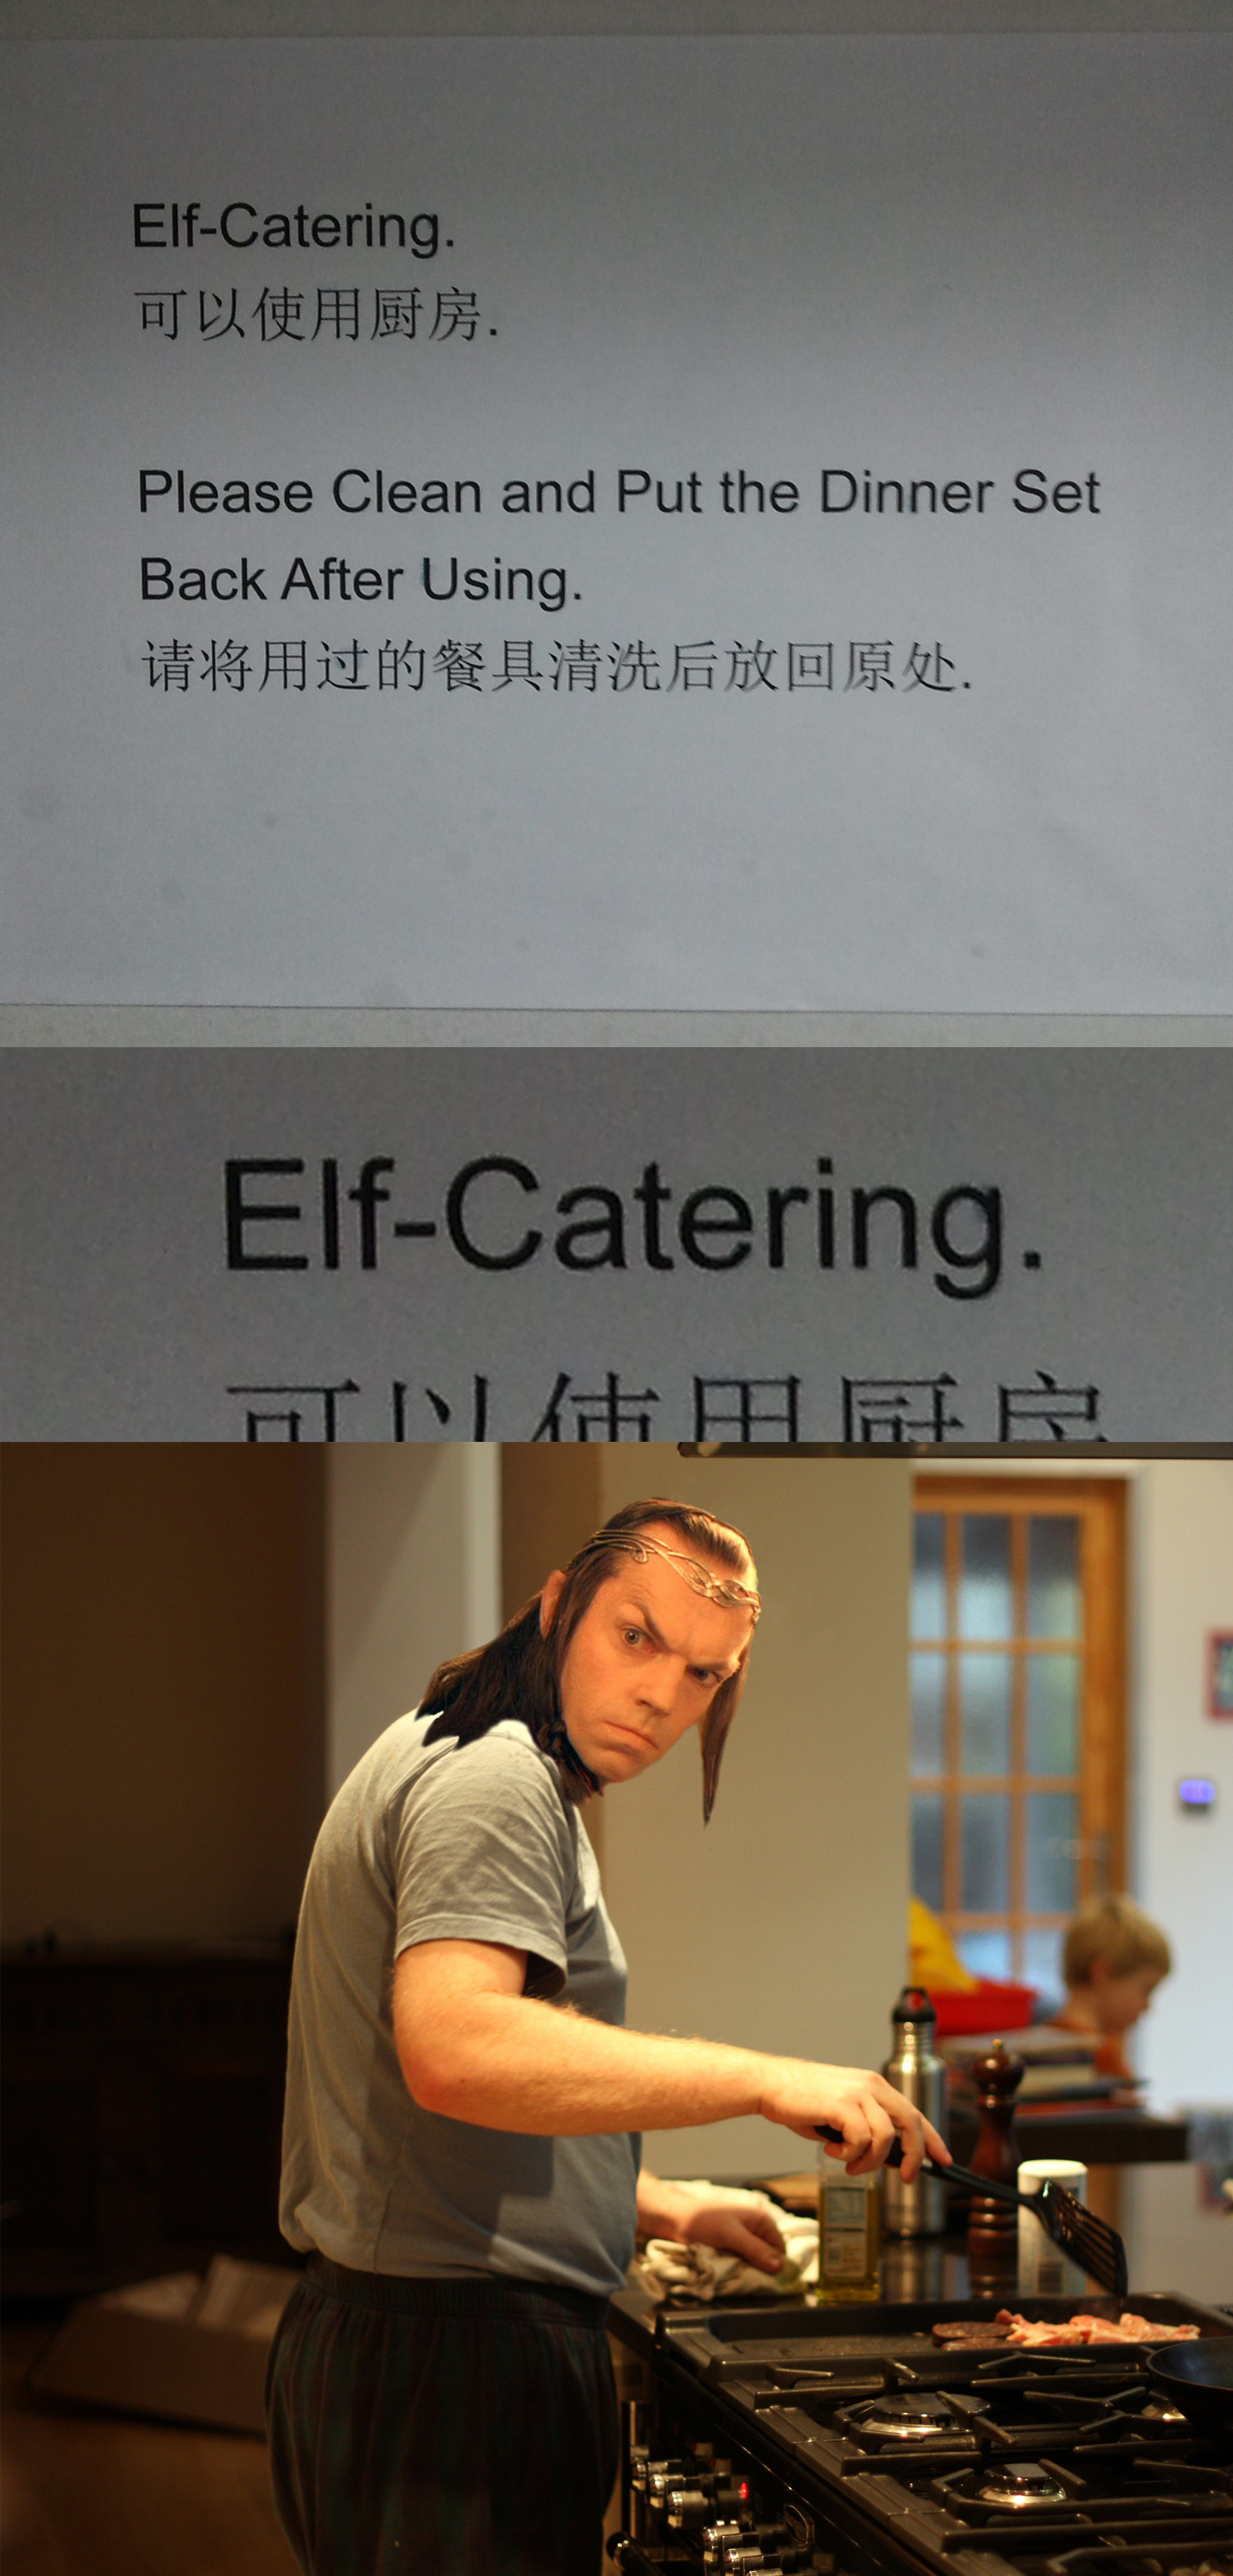 What do your chef eyes see, Legolas?